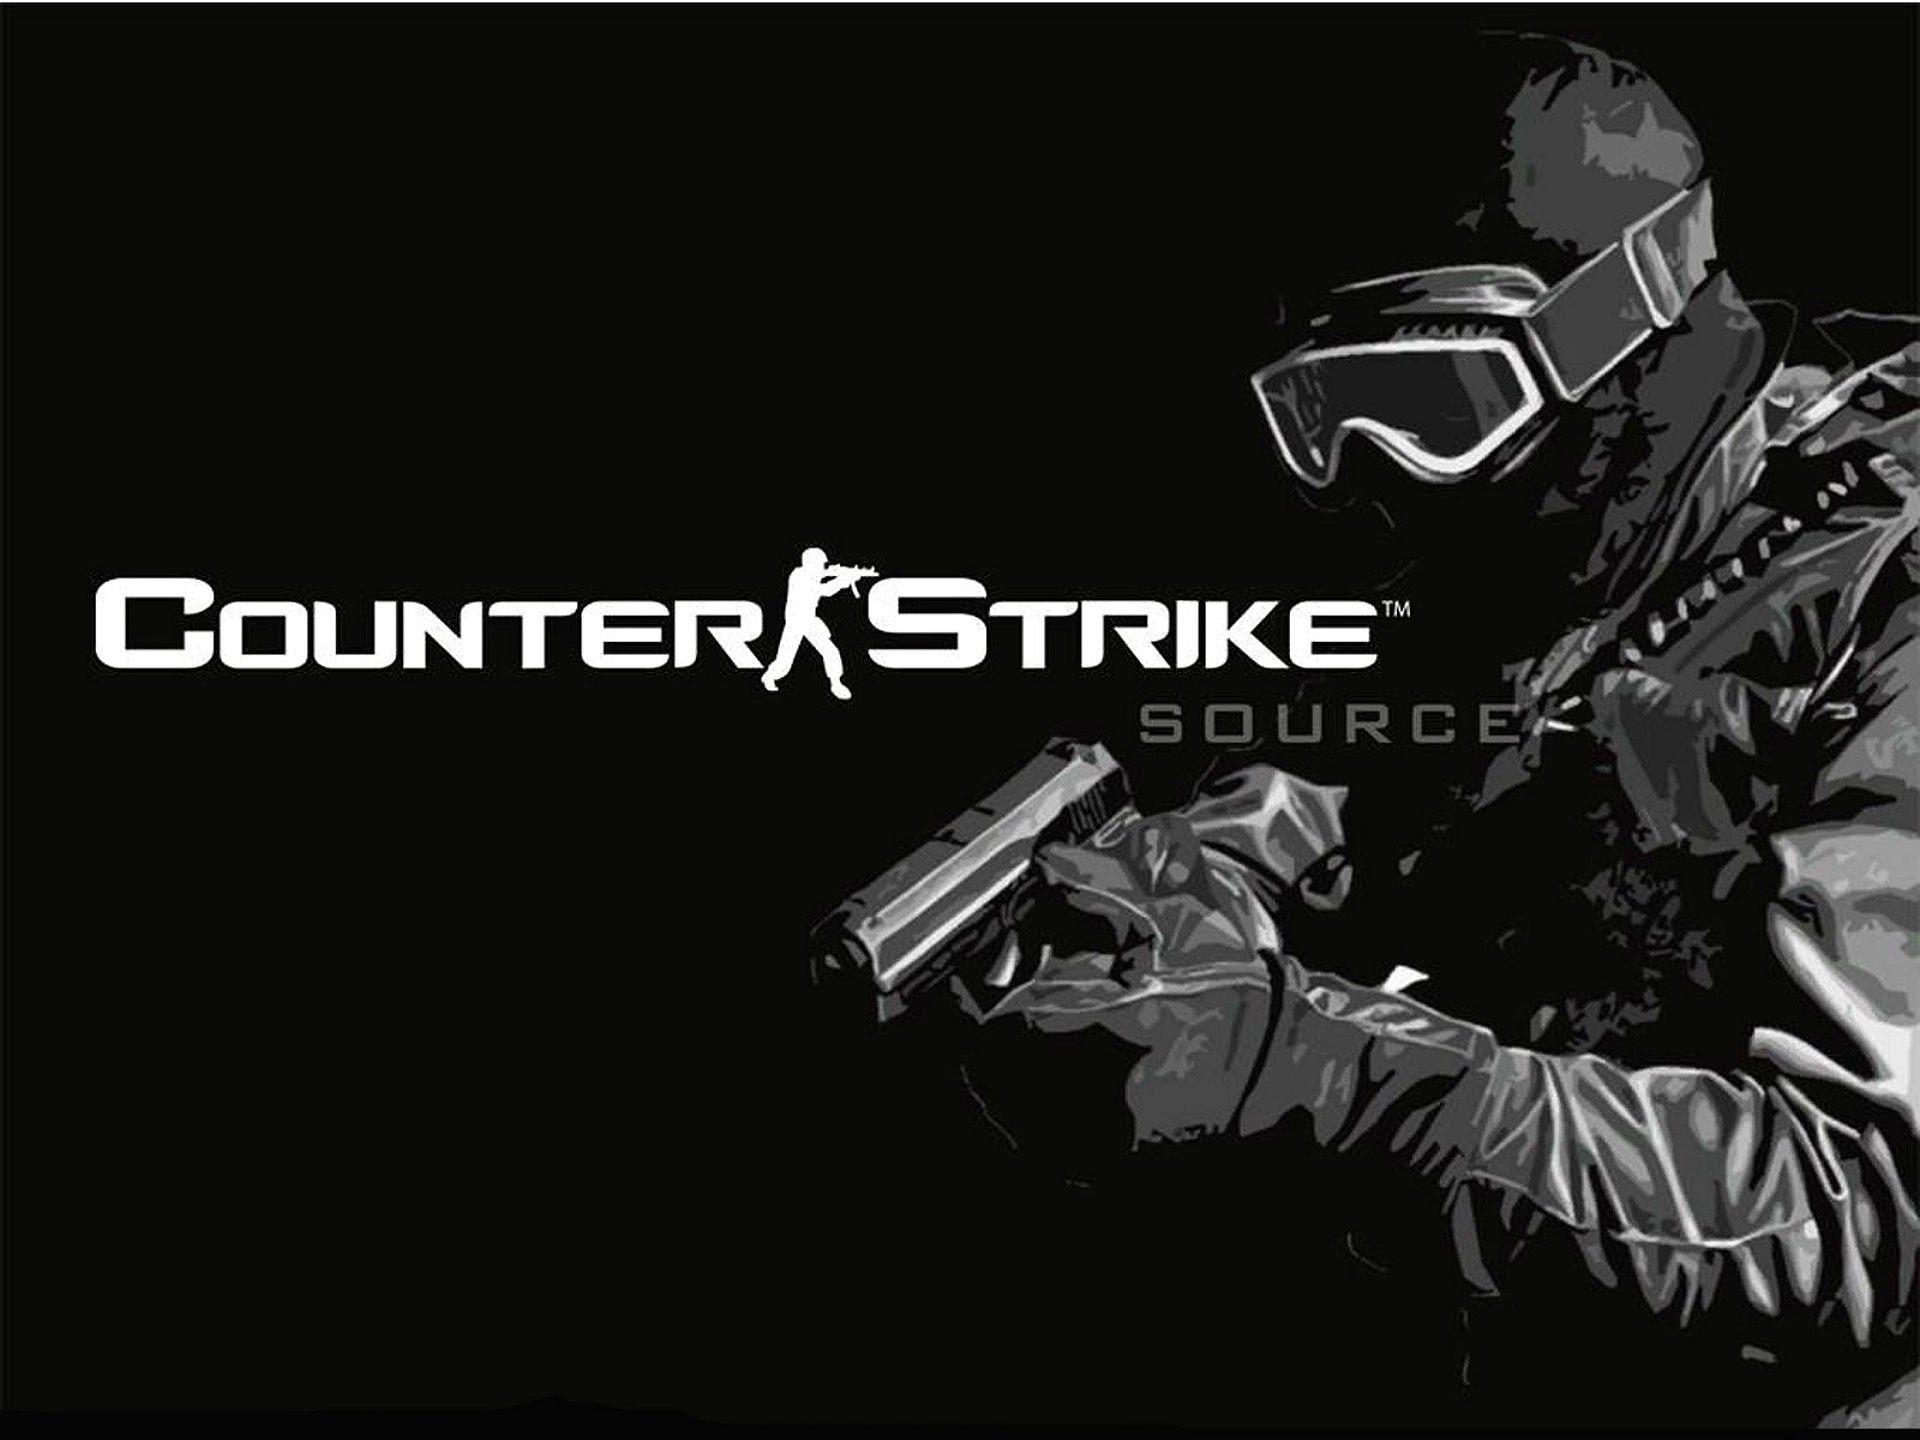 COUNTER STRIKE shooter military action weapon gun online fighting